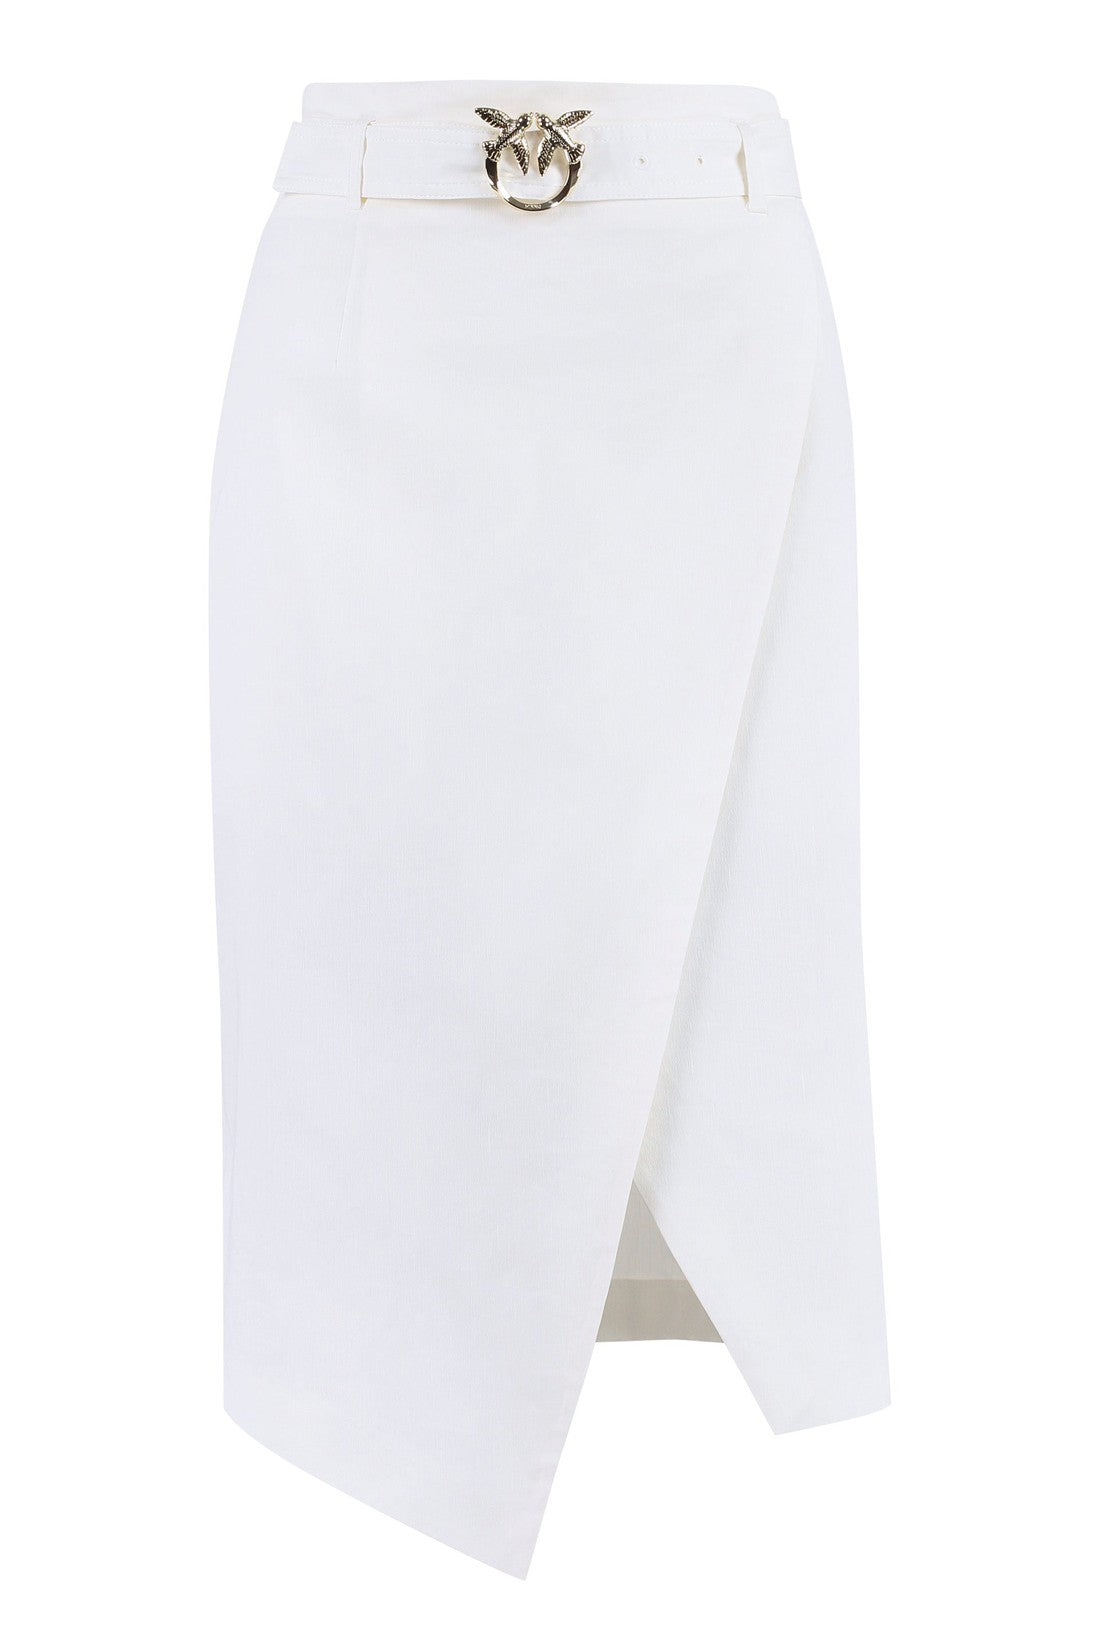 Pinko-OUTLET-SALE-Belted wrap skirt-ARCHIVIST